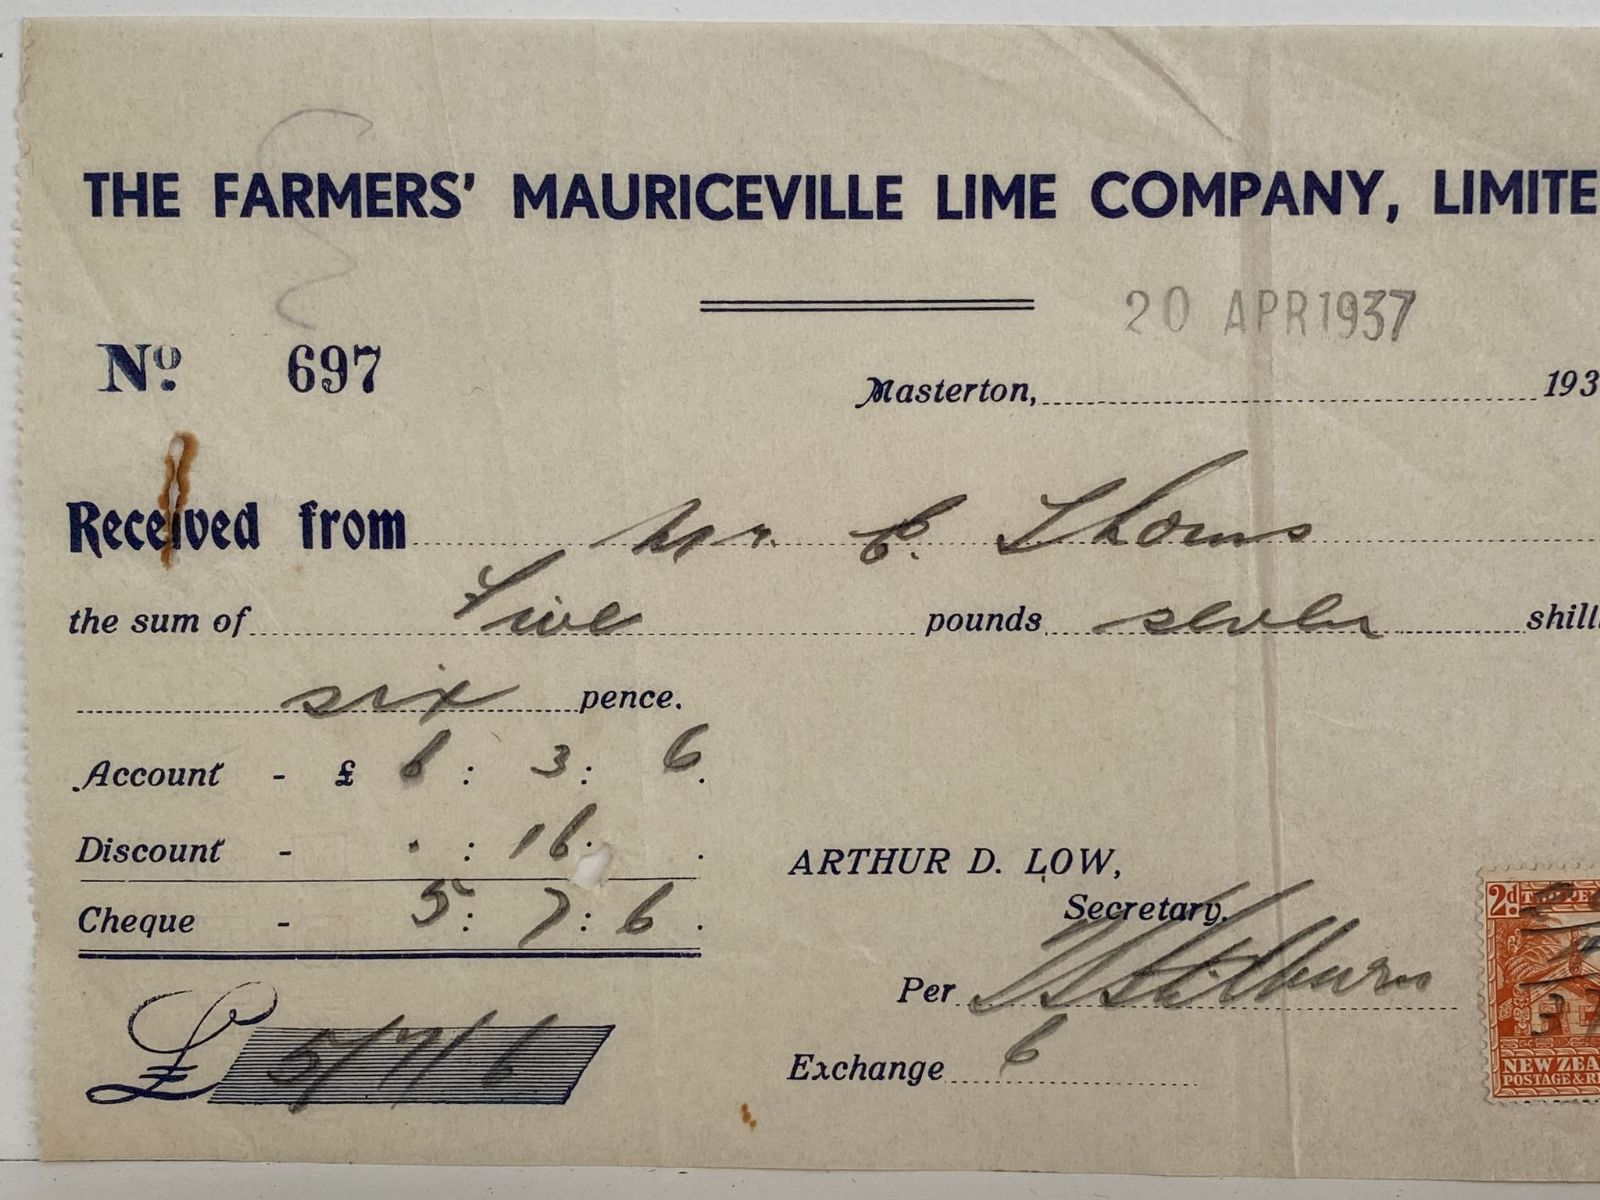 OLD INVOICE / RECEIPT: The Farmers Mauriceville Lime Company, Masterton 1937